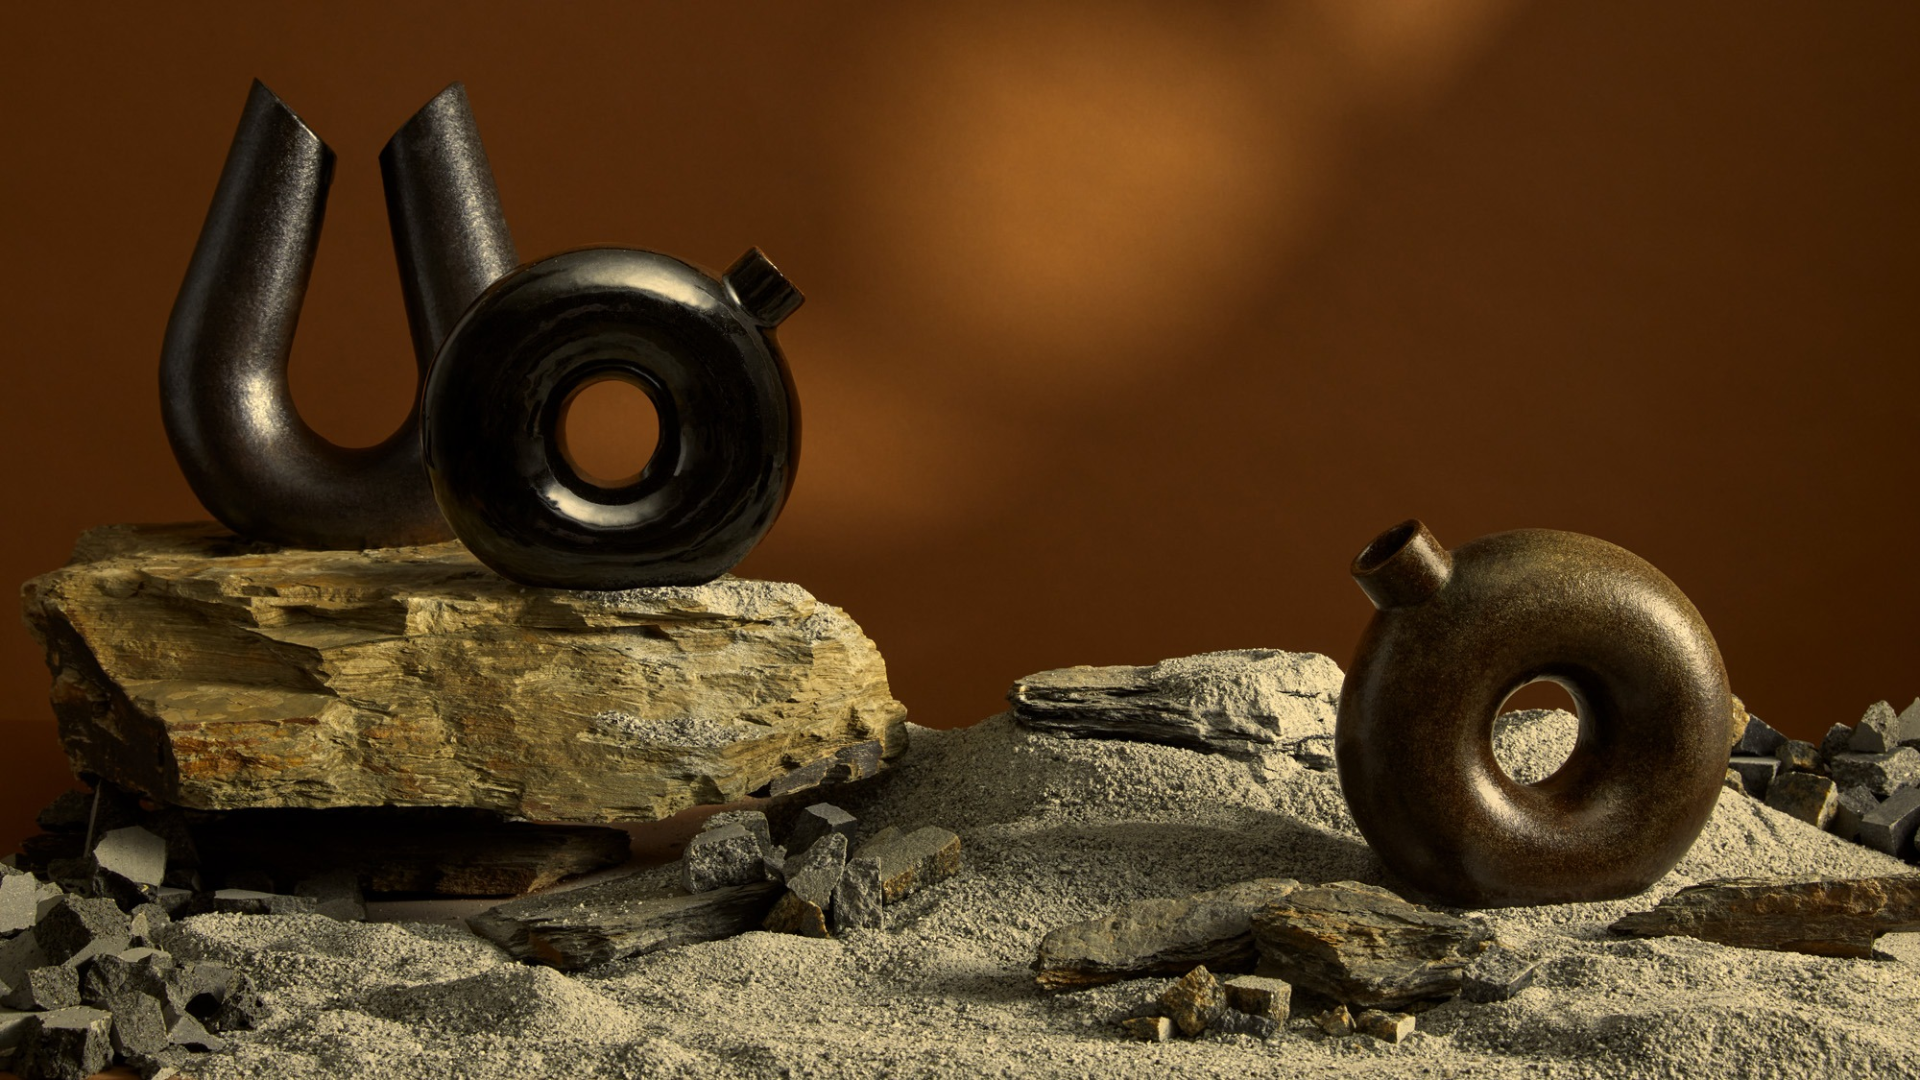 Two ceramic forms and three earth toned glazes of sculptural decanters on granite sand and a large piece of slate, surrounded by bluestone gravel against a brown background with dappled light